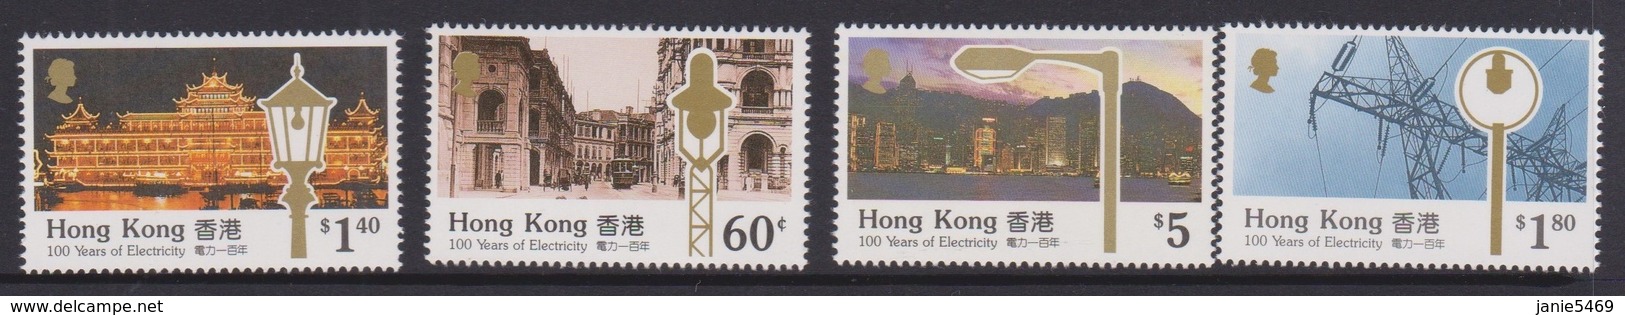 Hong Kong Scott 574-577 1990 Electricity Centenary, Mint Never Hinged - Unused Stamps